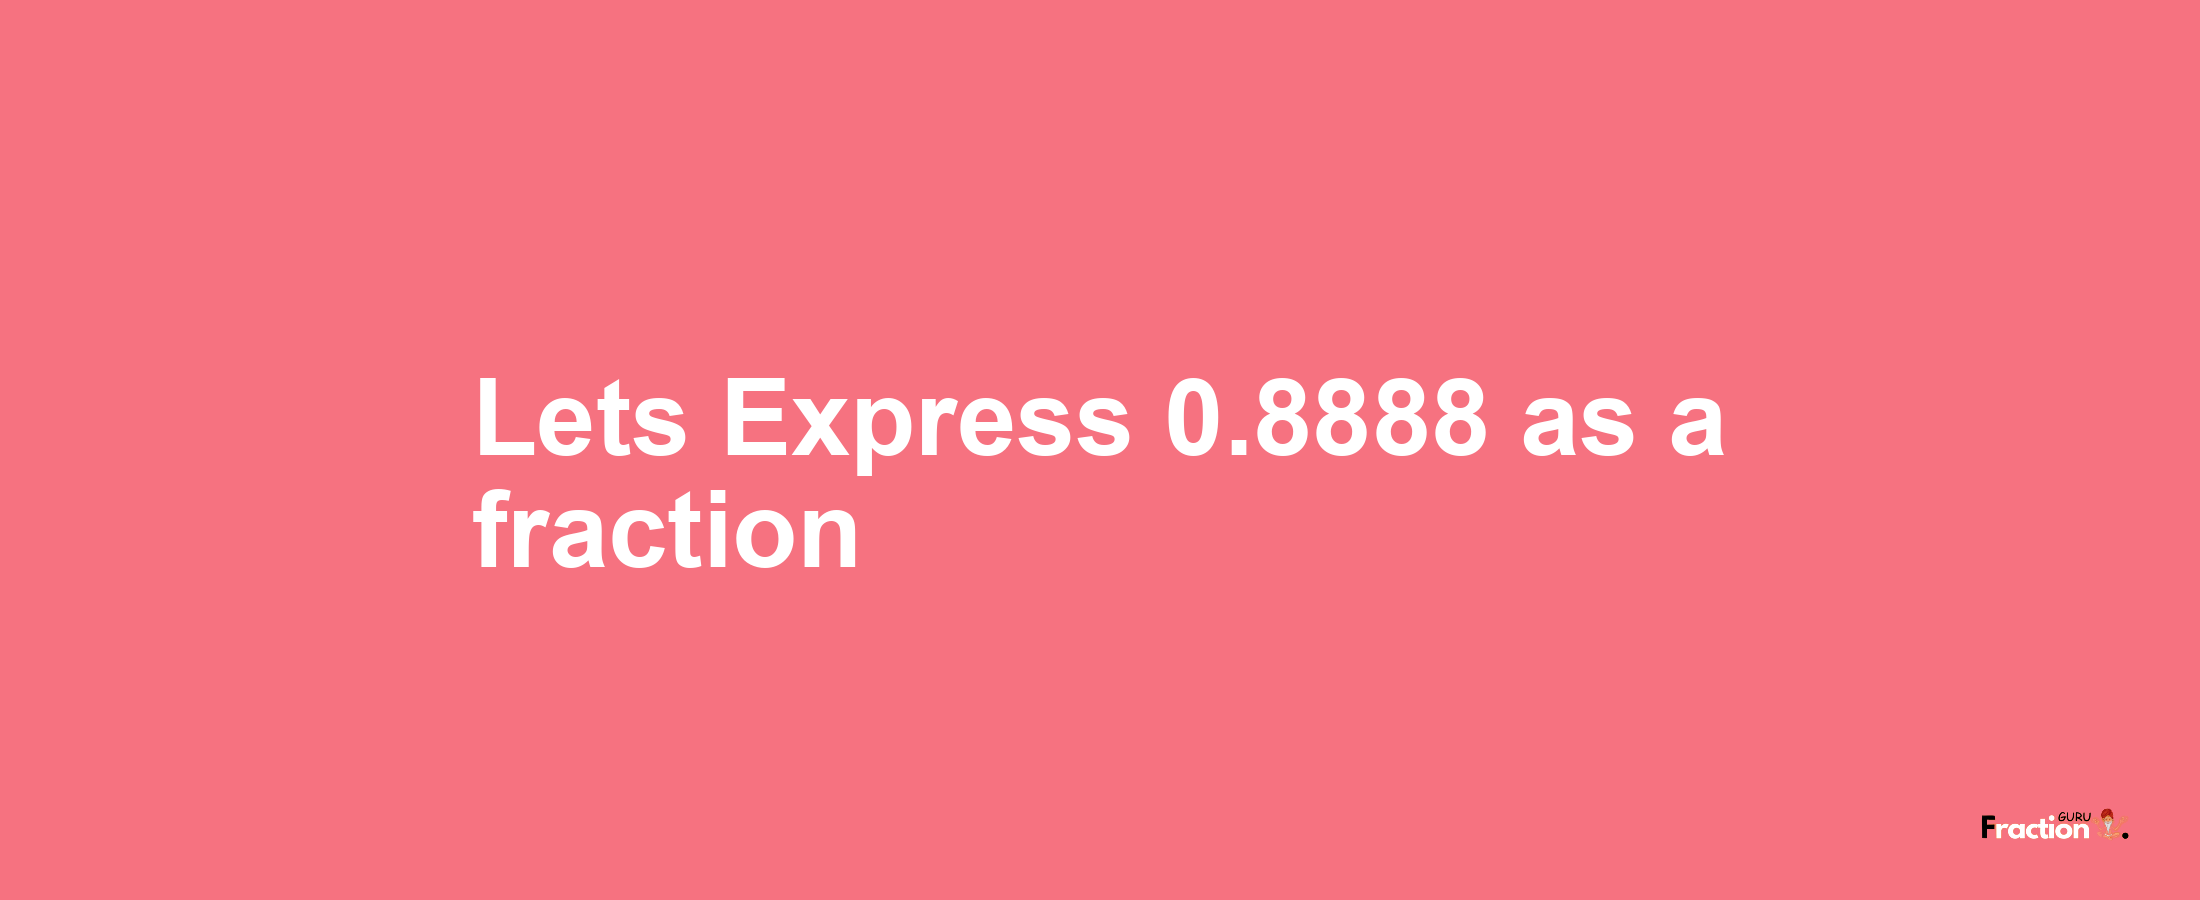 Lets Express 0.8888 as afraction